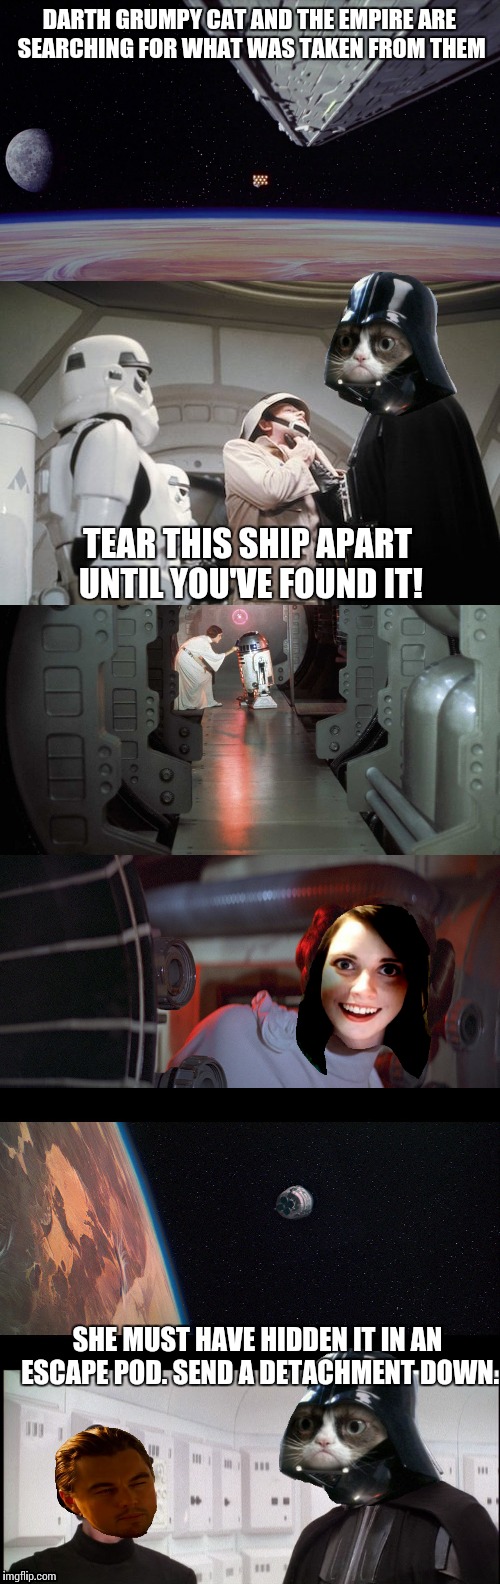  DARTH GRUMPY CAT AND THE EMPIRE ARE SEARCHING FOR WHAT WAS TAKEN FROM THEM; TEAR THIS SHIP APART UNTIL YOU'VE FOUND IT! SHE MUST HAVE HIDDEN IT IN AN ESCAPE POD. SEND A DETACHMENT DOWN. | made w/ Imgflip meme maker